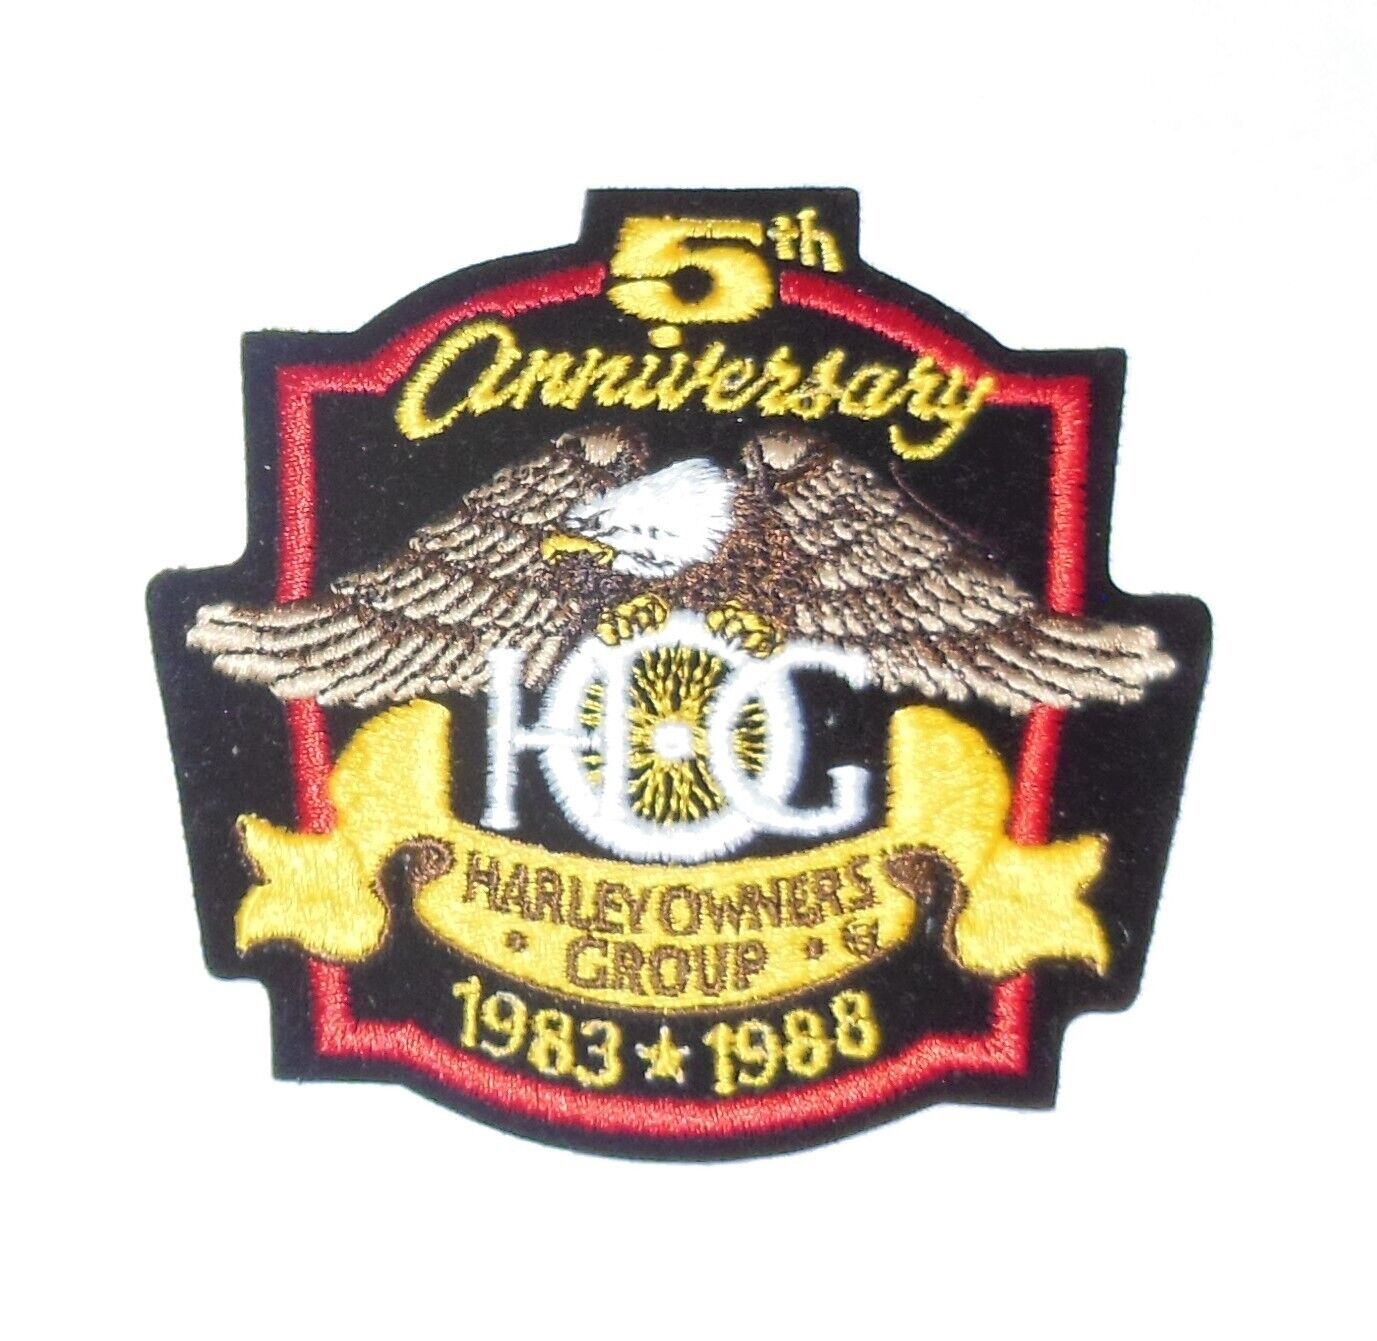 HARLEY OWNERS GROUP 5th ANNIVERSARY PATCH - HOG 1983 to 1988 VERY NICE CONDITION